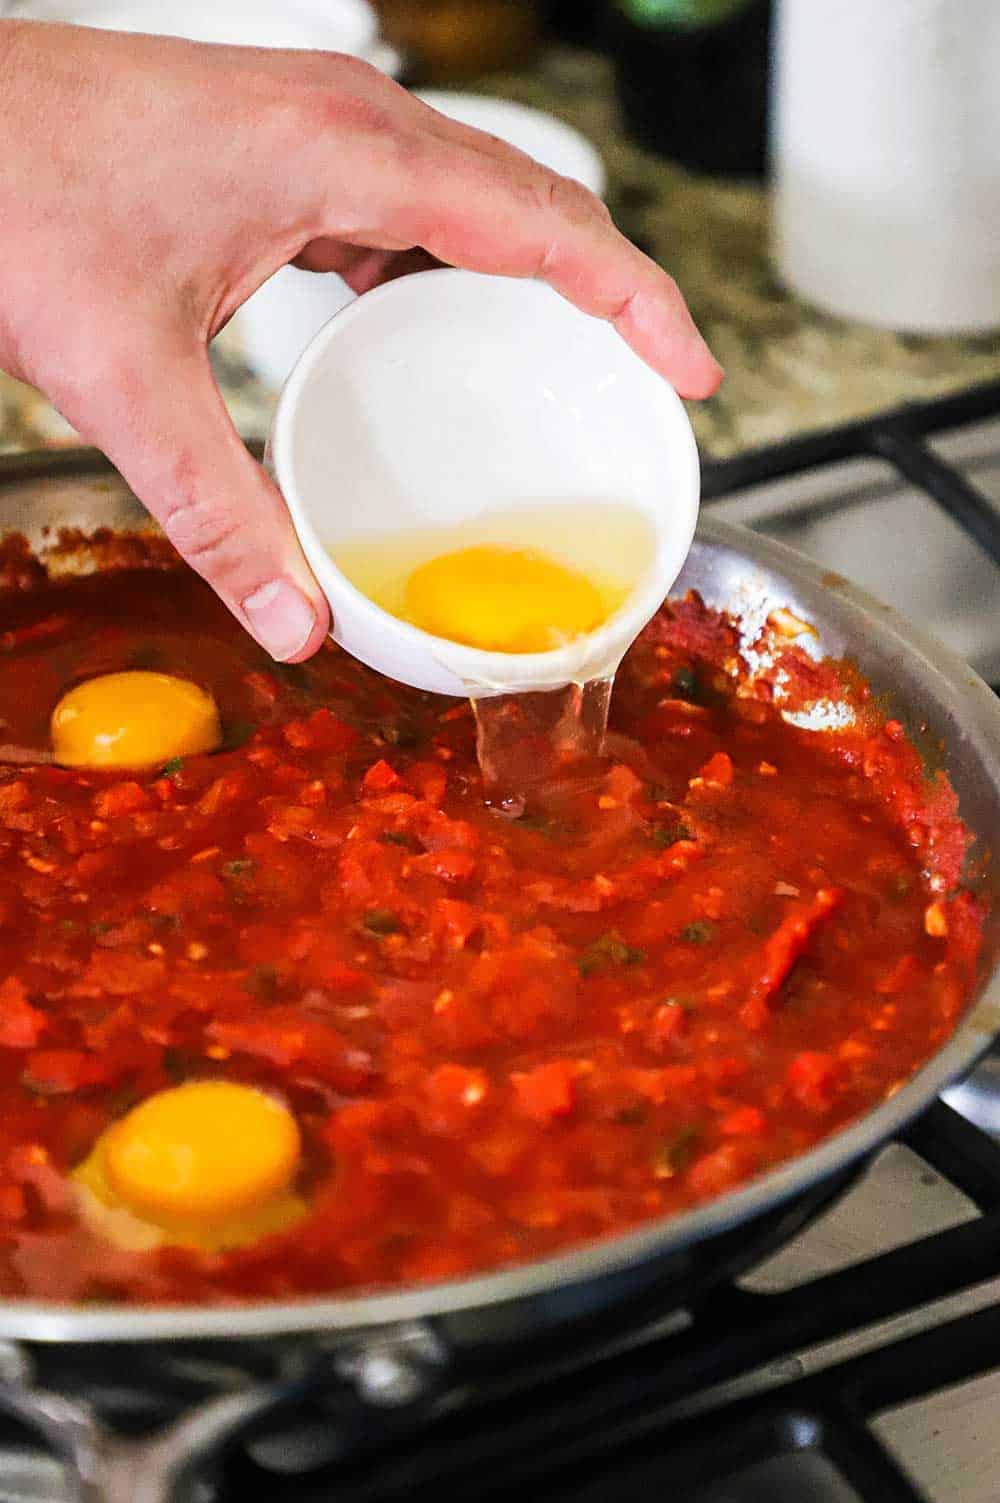 A person transferring an uncooked egg into a skillet filled with a savory tomato sauce.